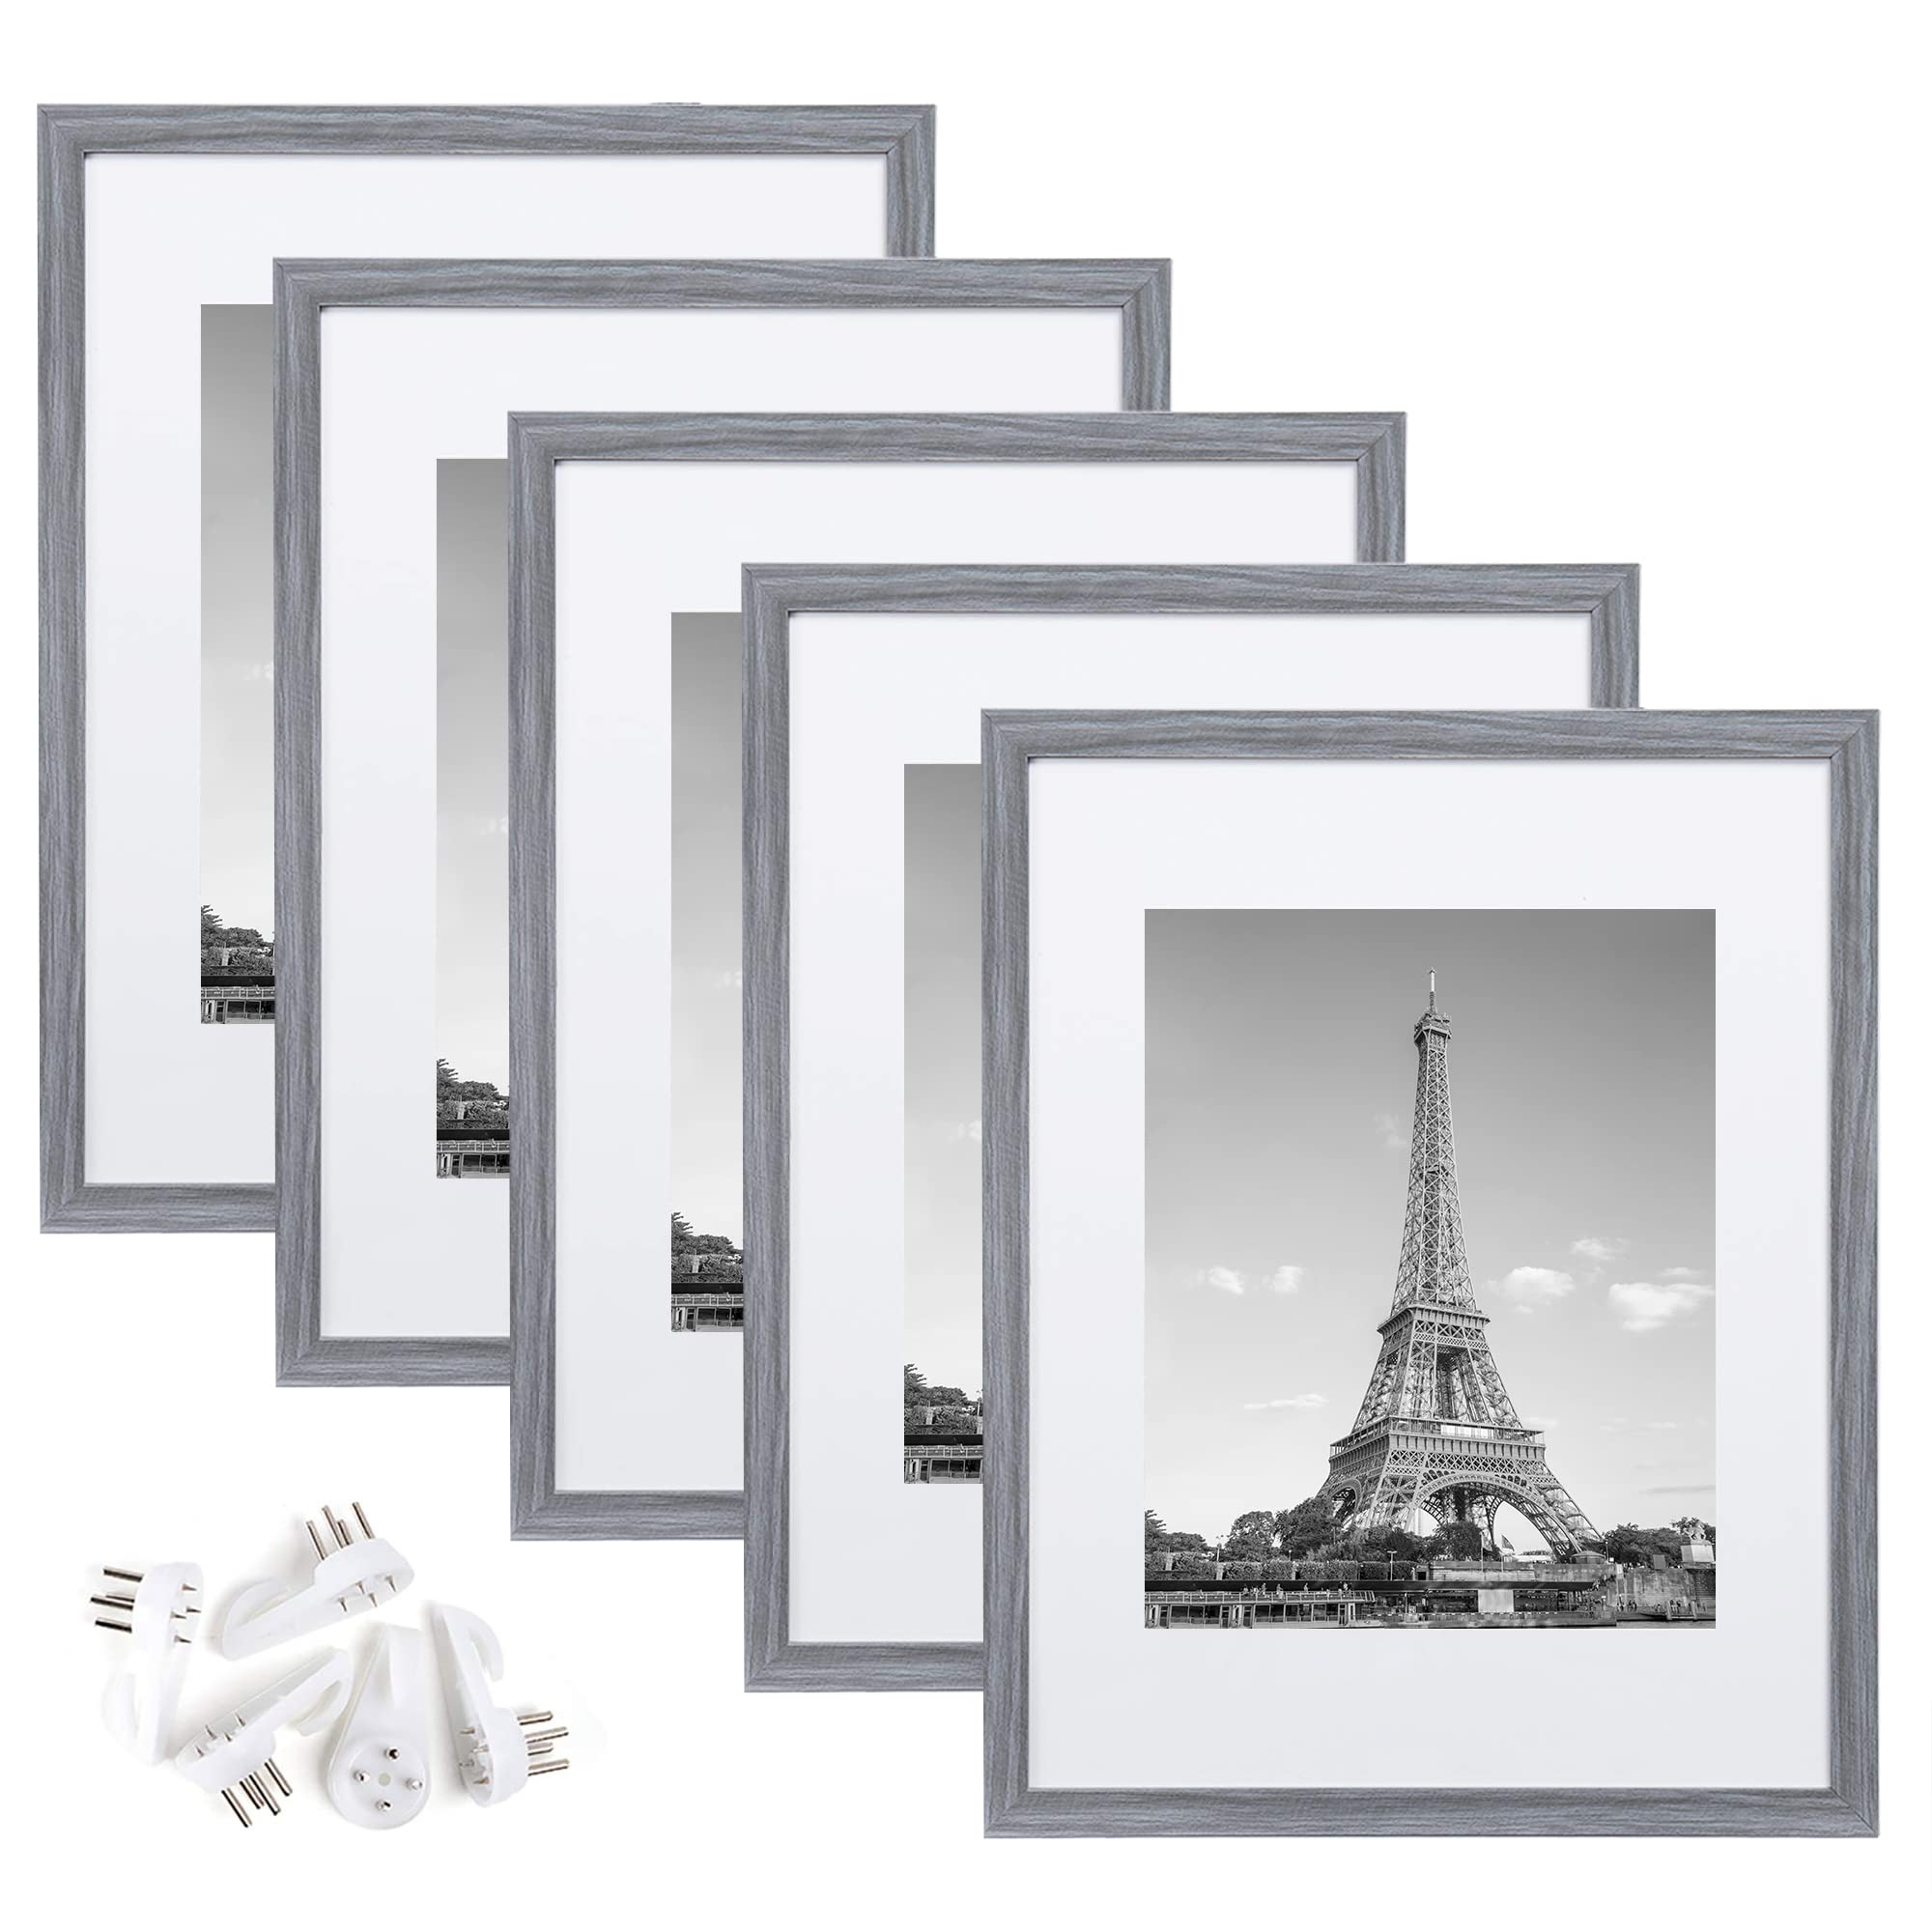 upsimples 11x14 Picture Frame Set of 5,Display Pictures 8x10 with